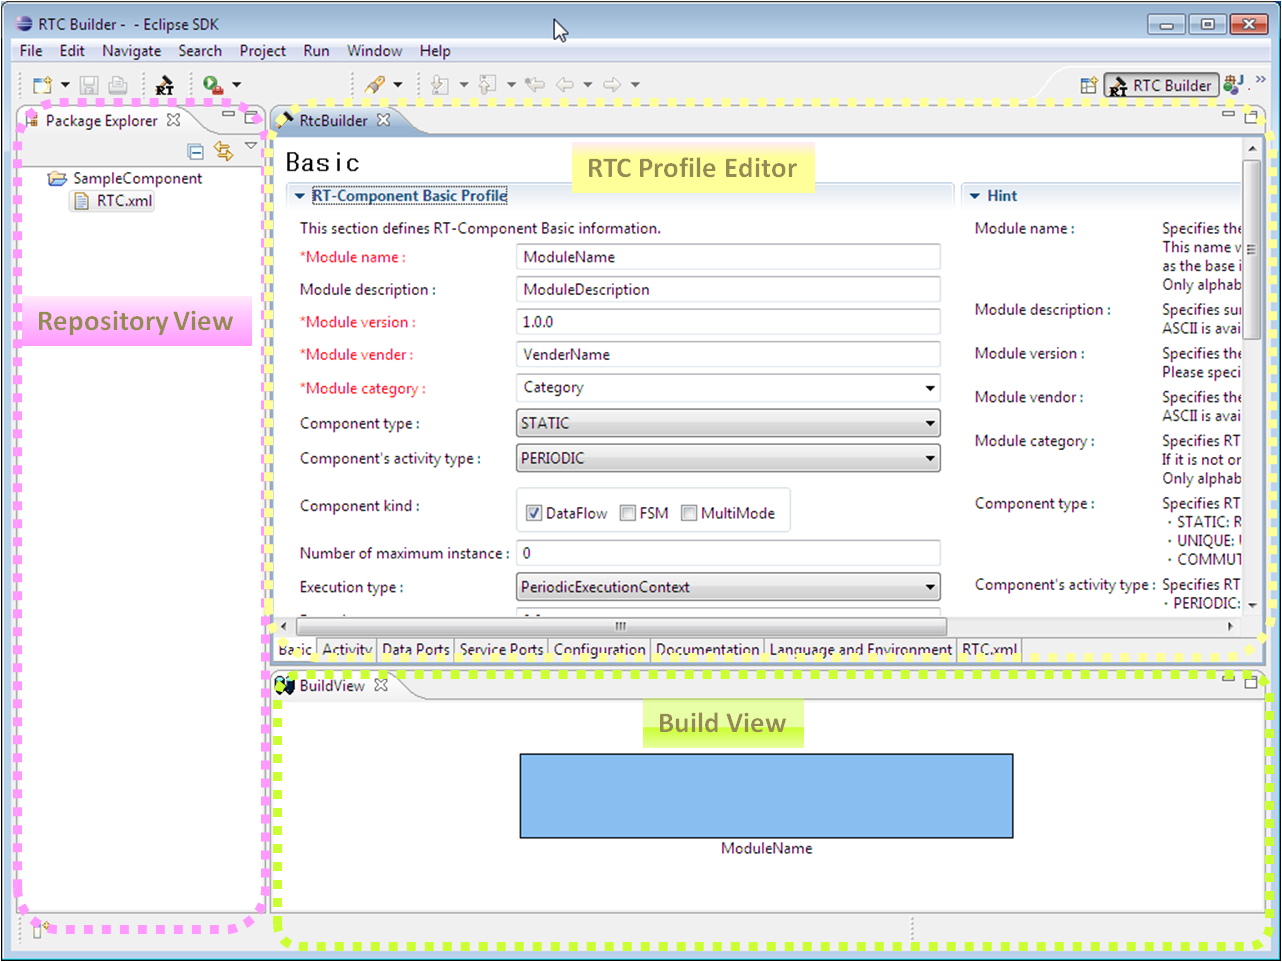 The graphical interface of RTC Builder